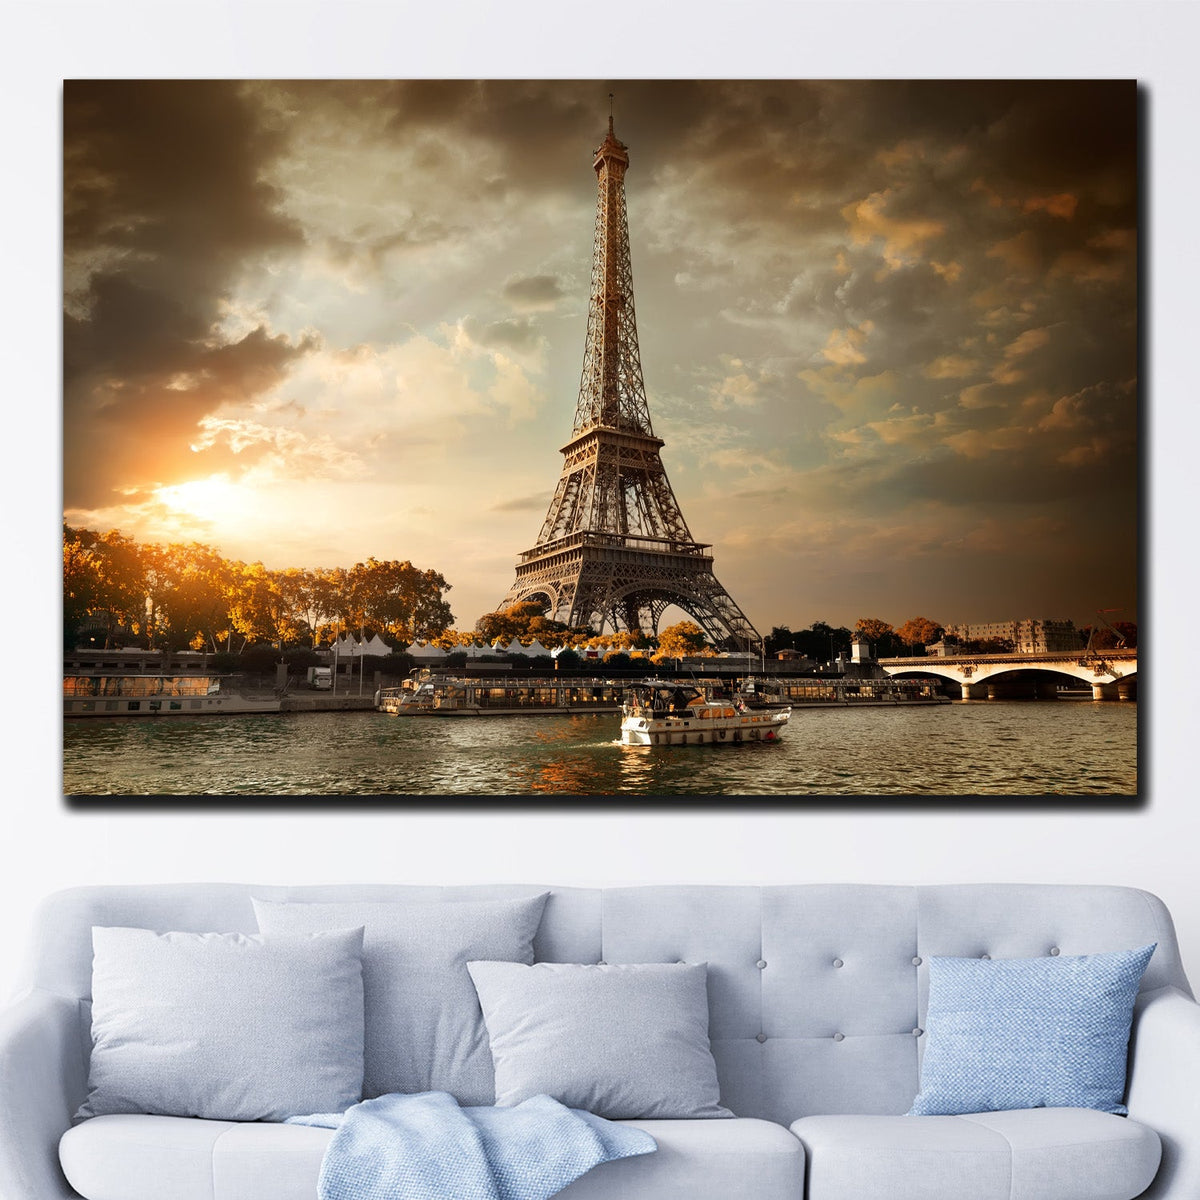 https://cdn.shopify.com/s/files/1/0387/9986/8044/products/CloudsoverEiffelTowerCanvasArtprintStretched-4.jpg